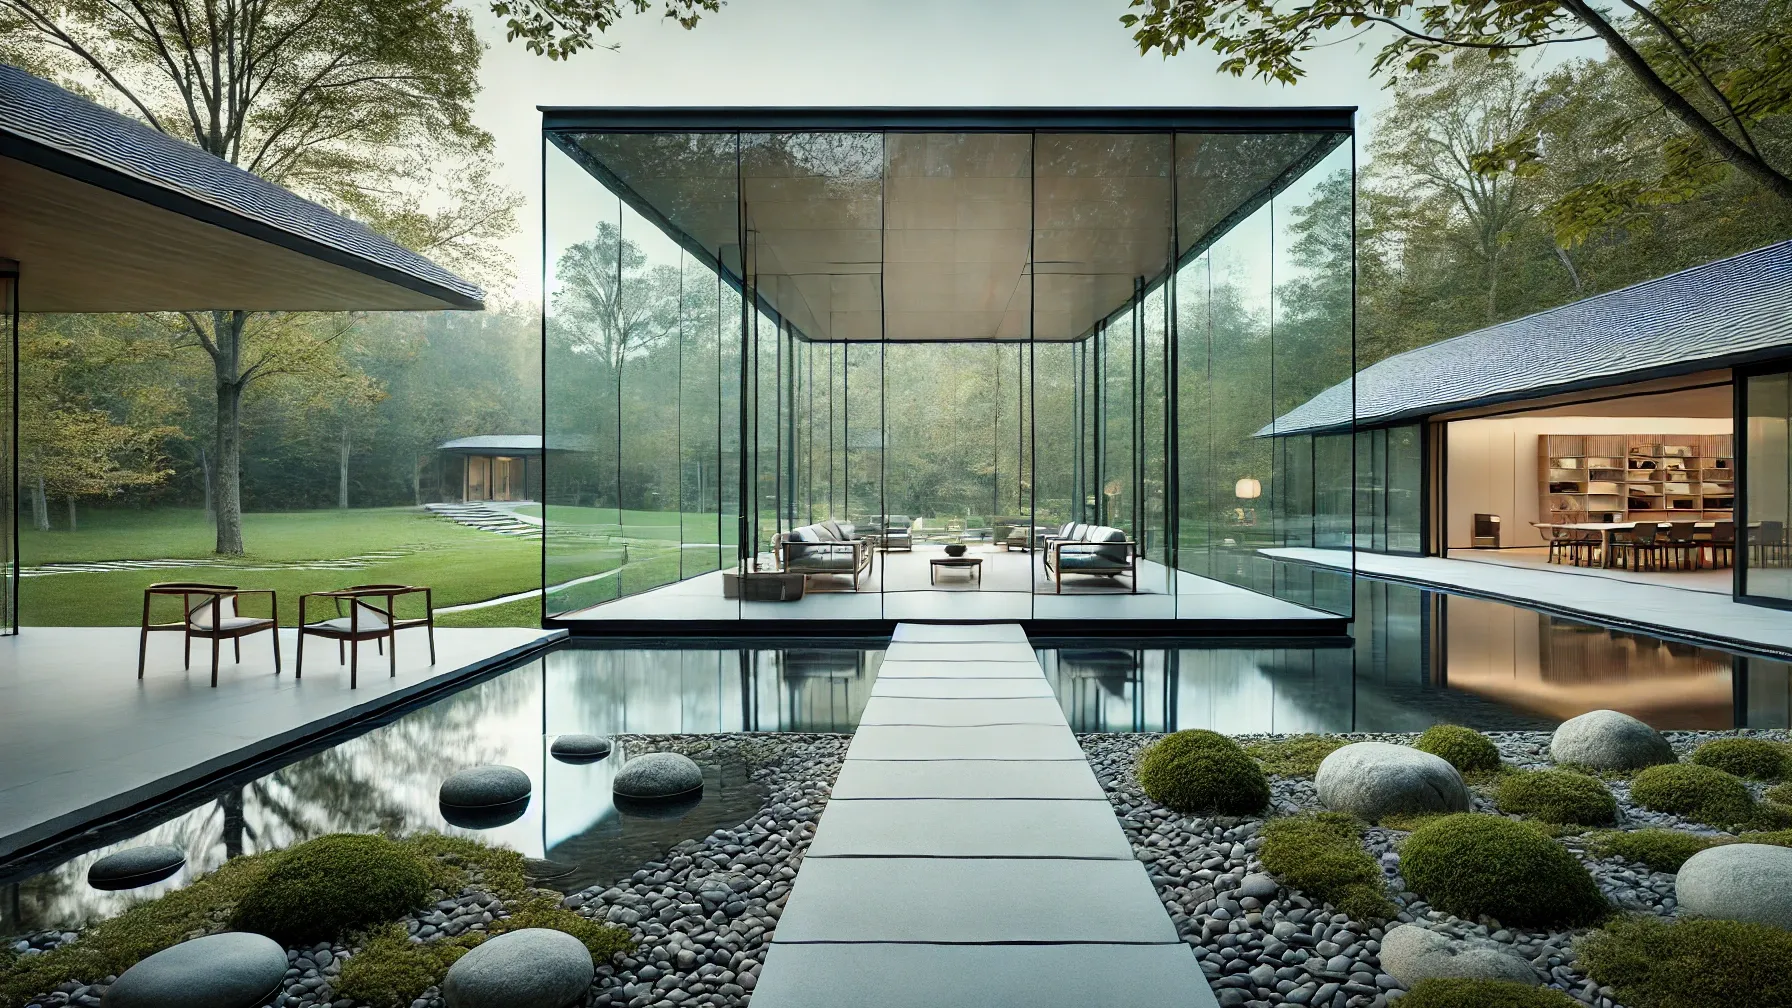 The Glass House in New Canaan, Connecticut, inspired by Zen principles